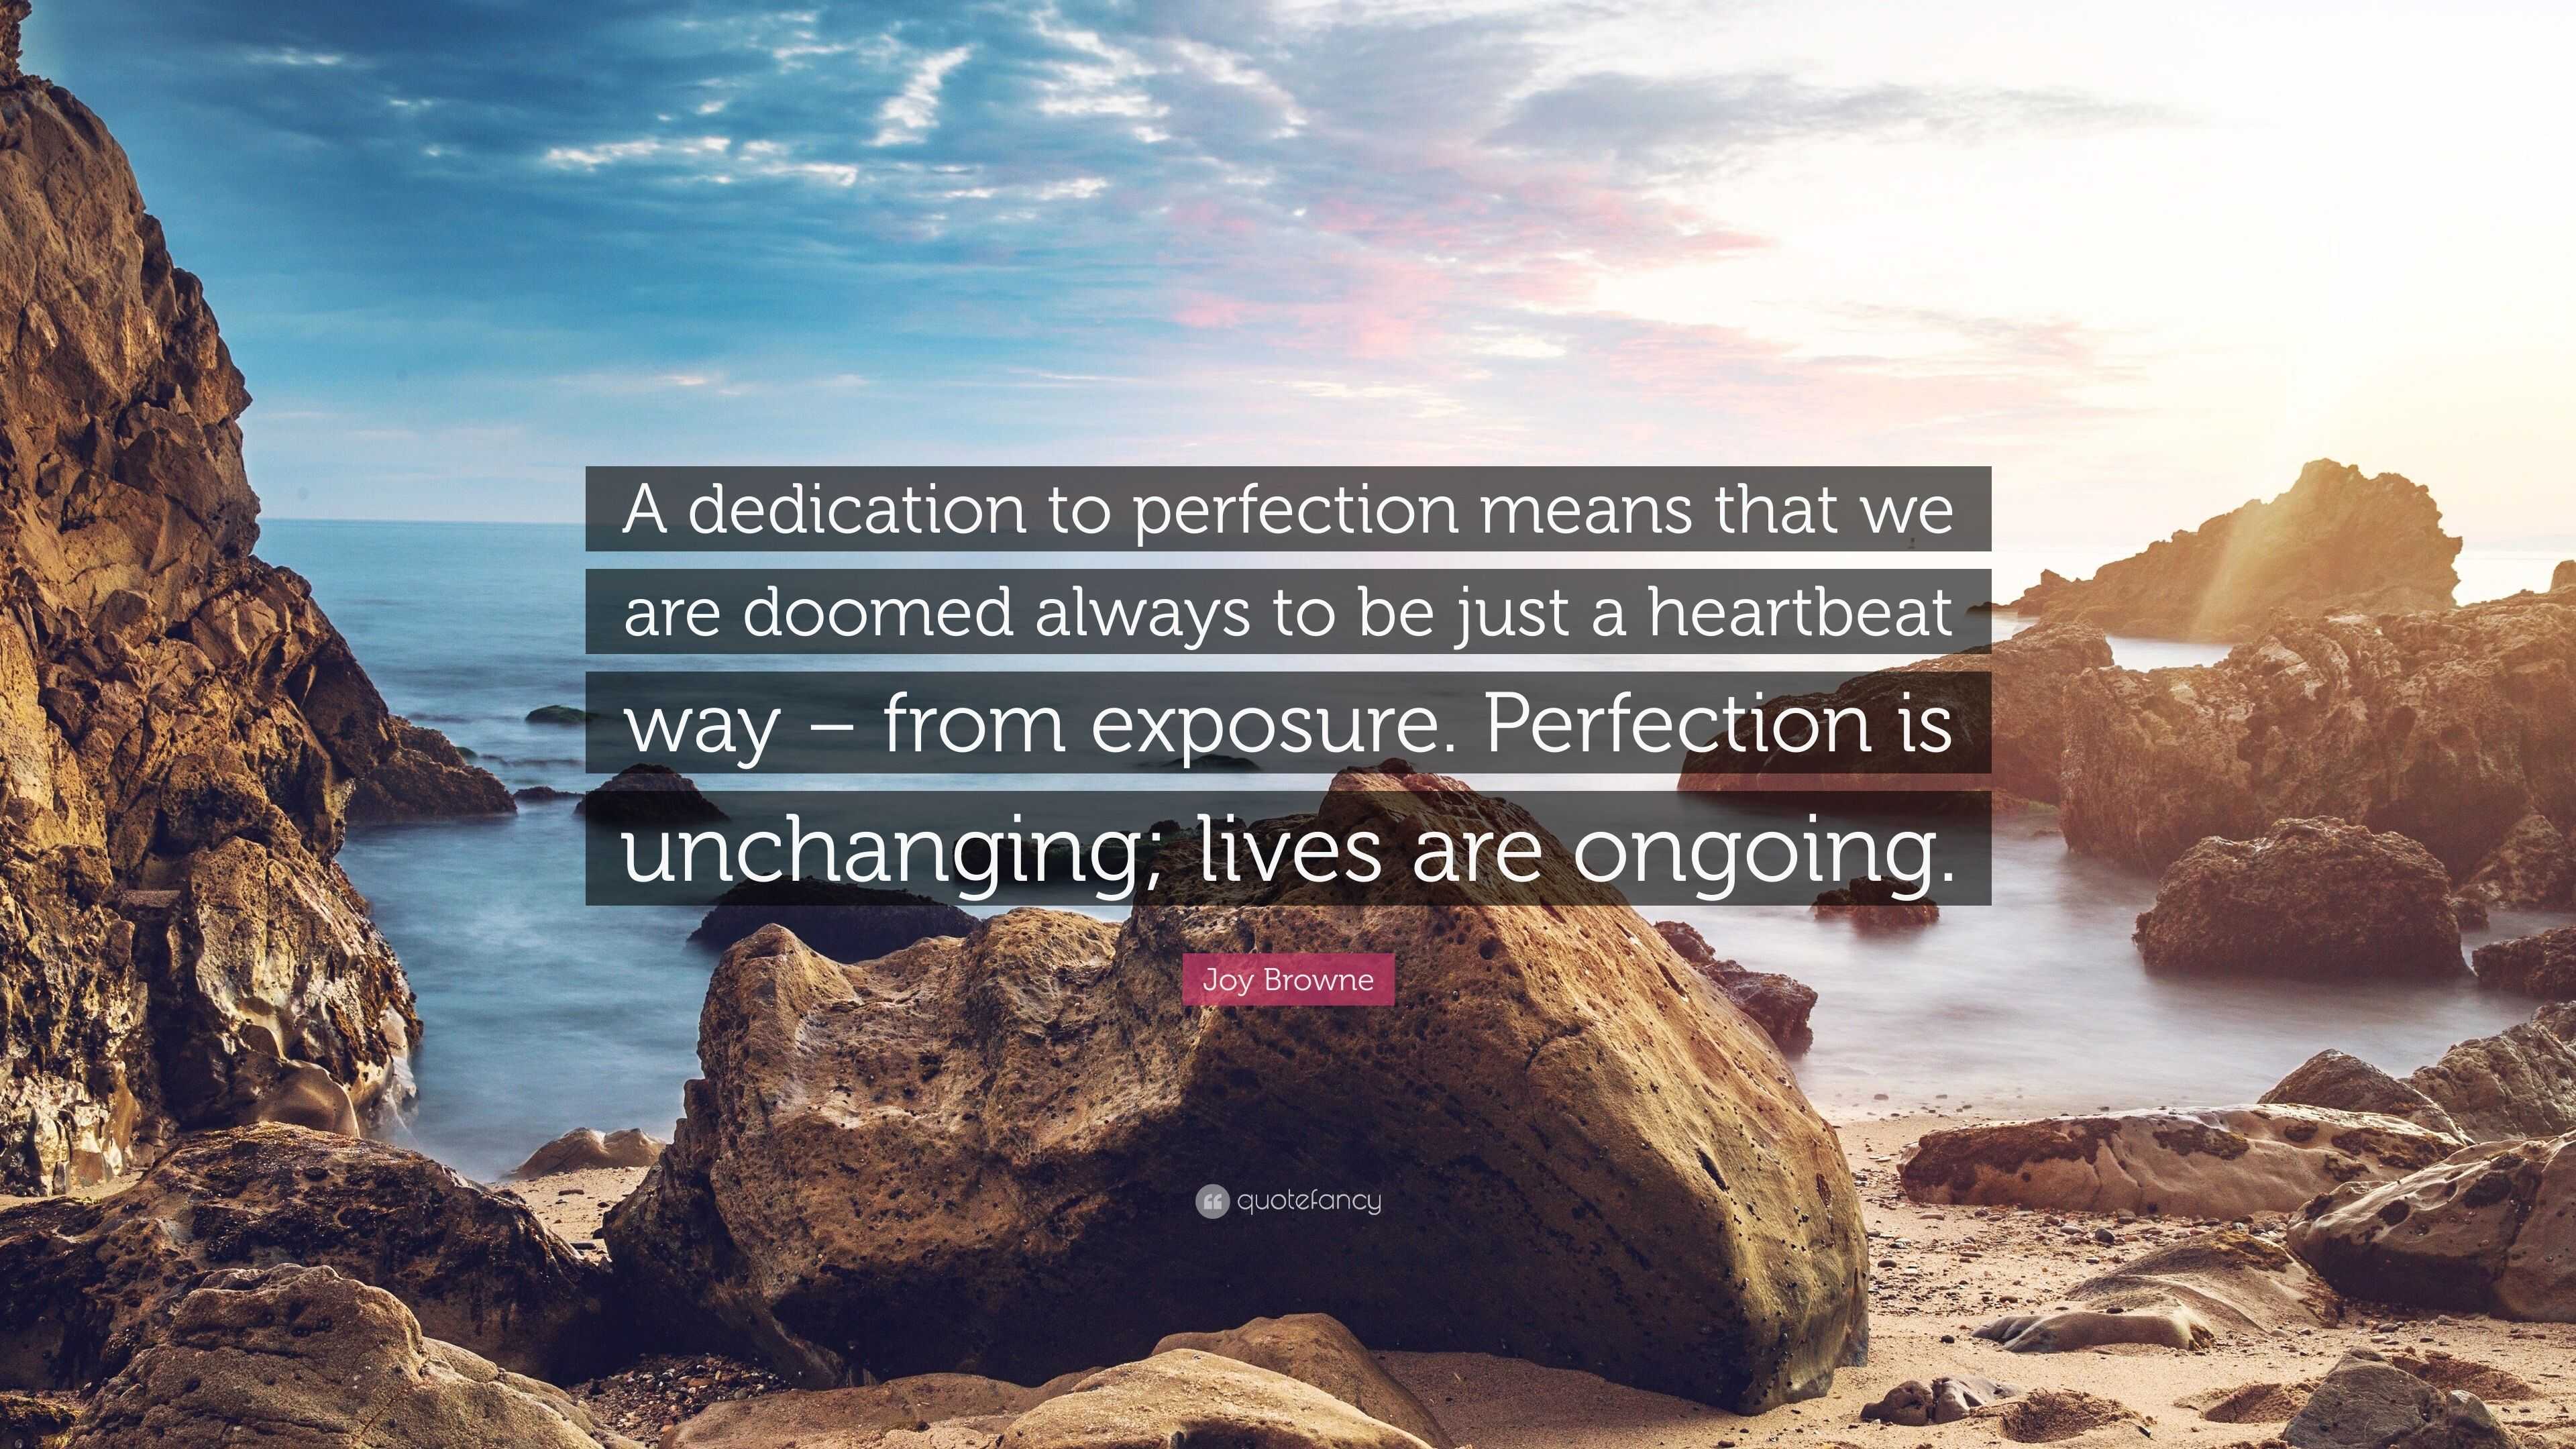 Joy Browne Quote: “A dedication to perfection means that we are